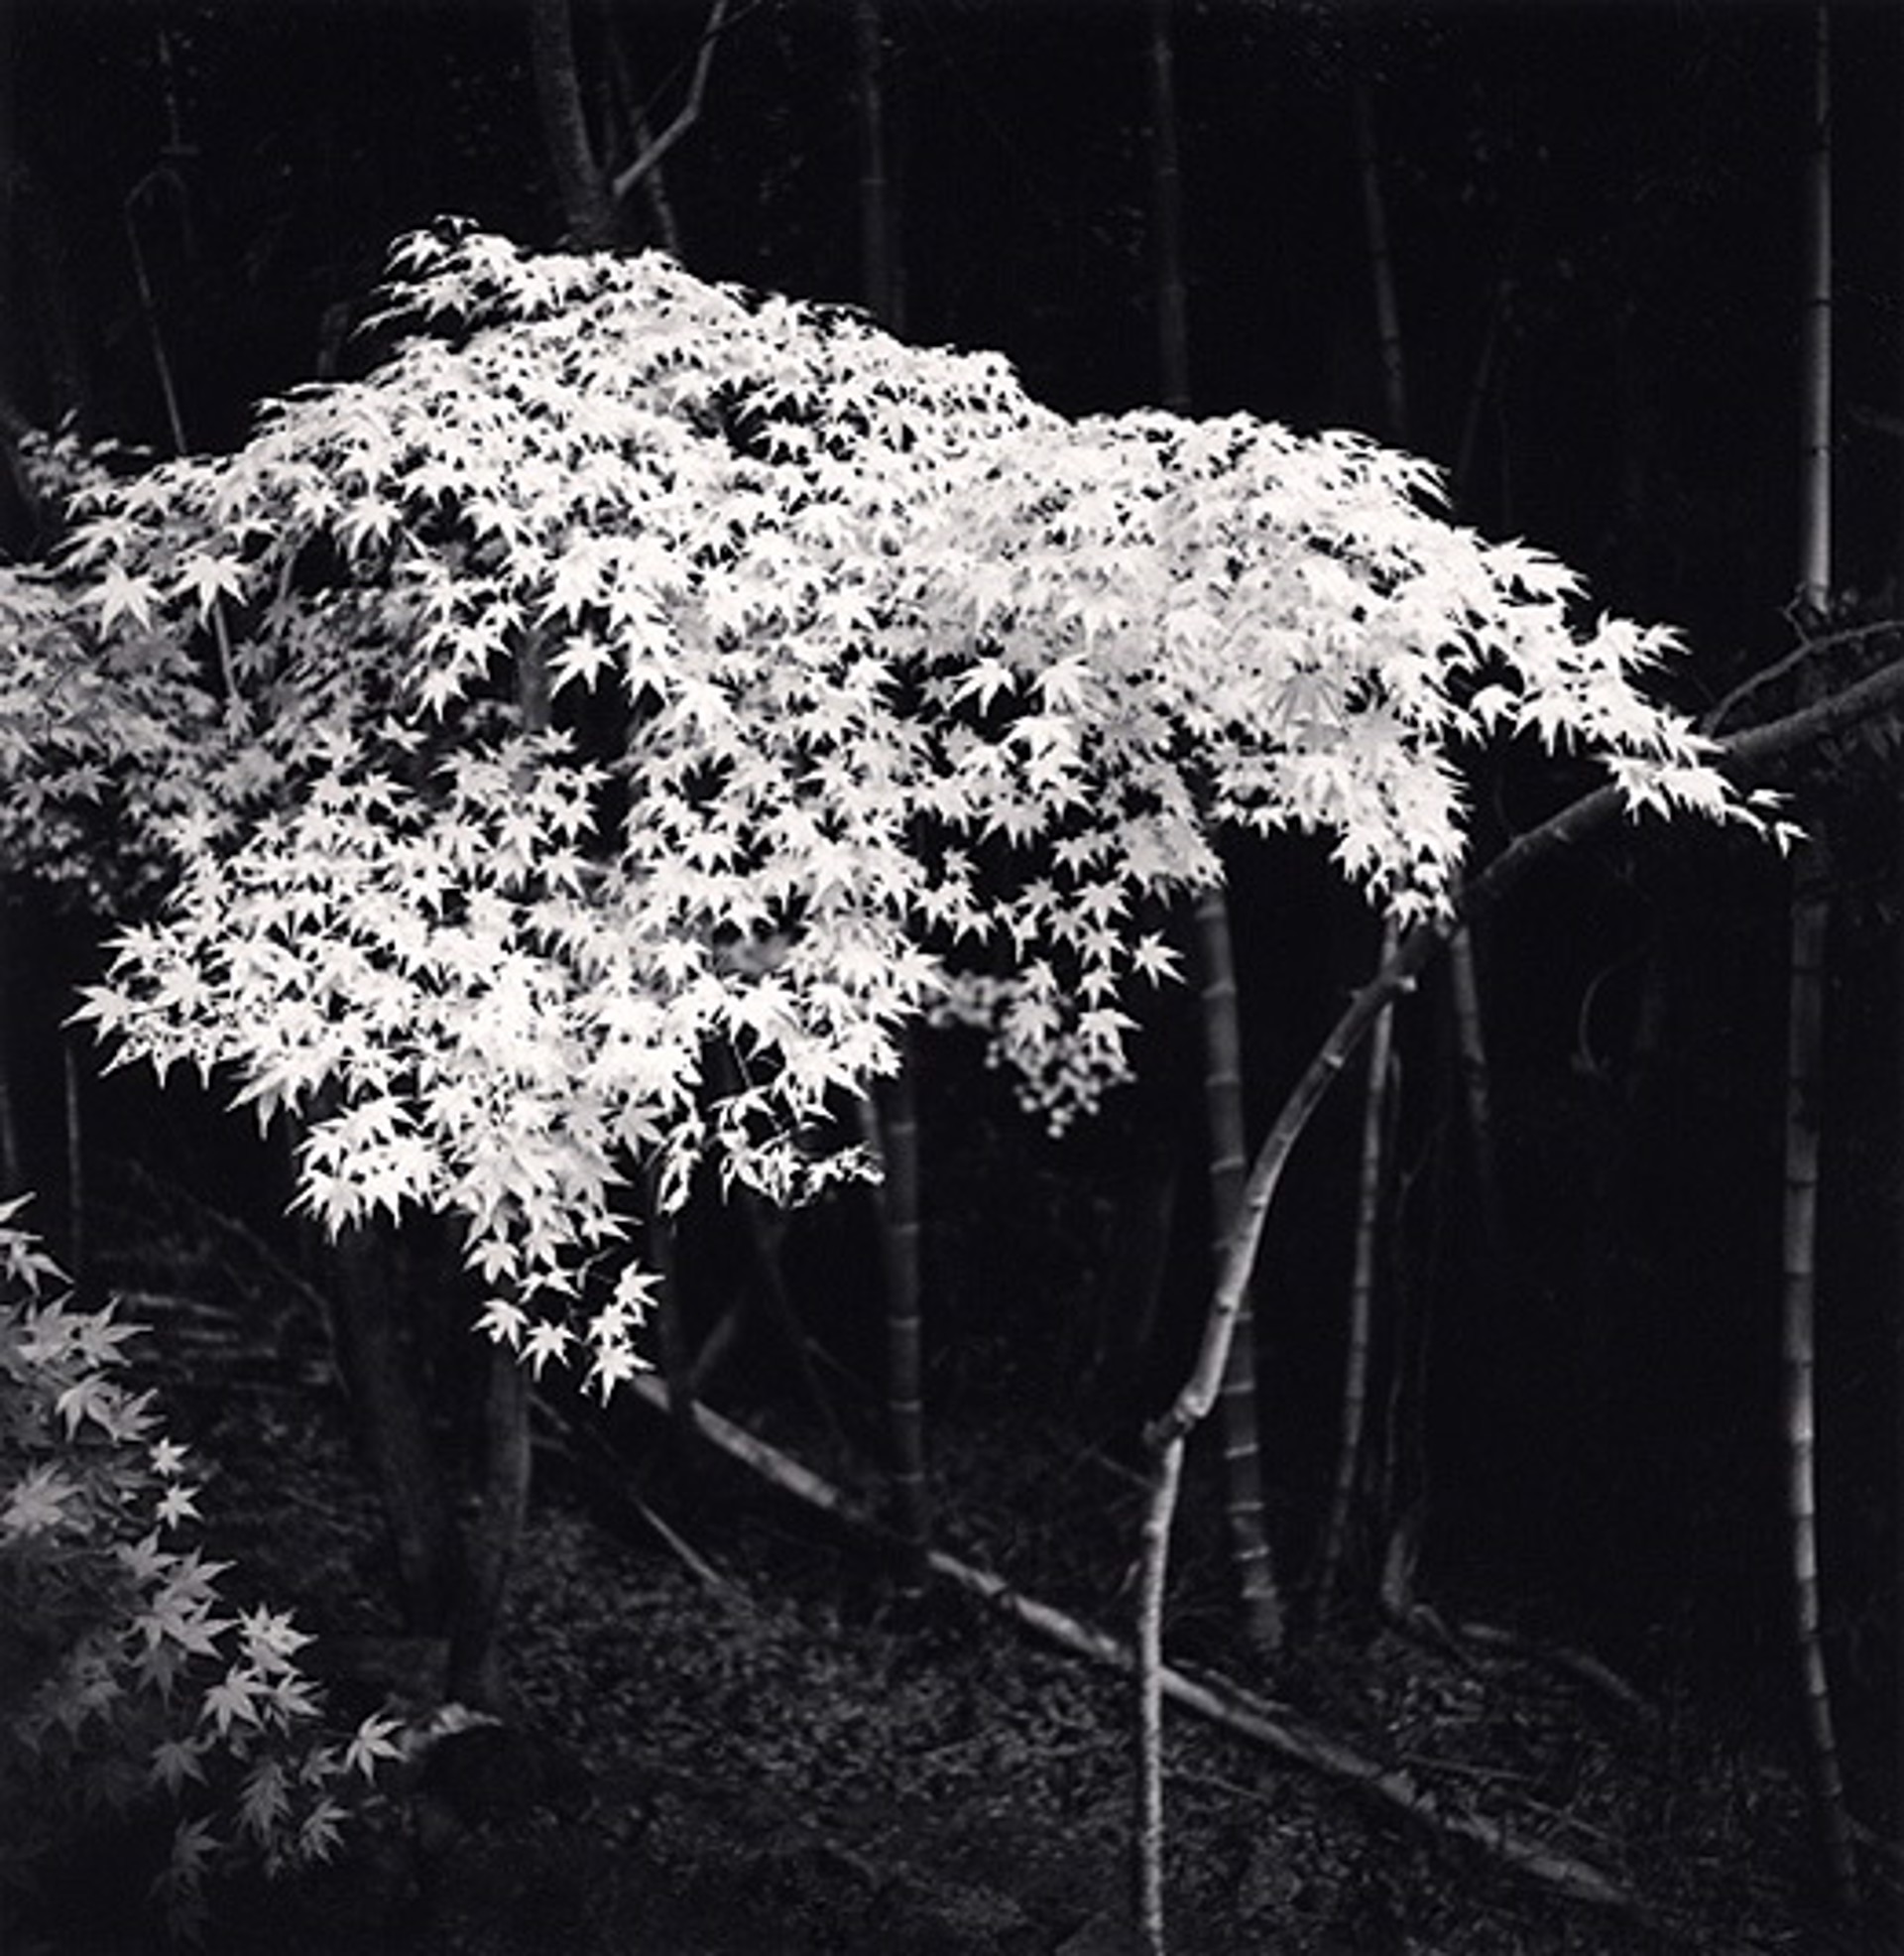 Maple Tree in Autumn, Kyoto, Honshu, Japan (edition of 45) by Michael Kenna